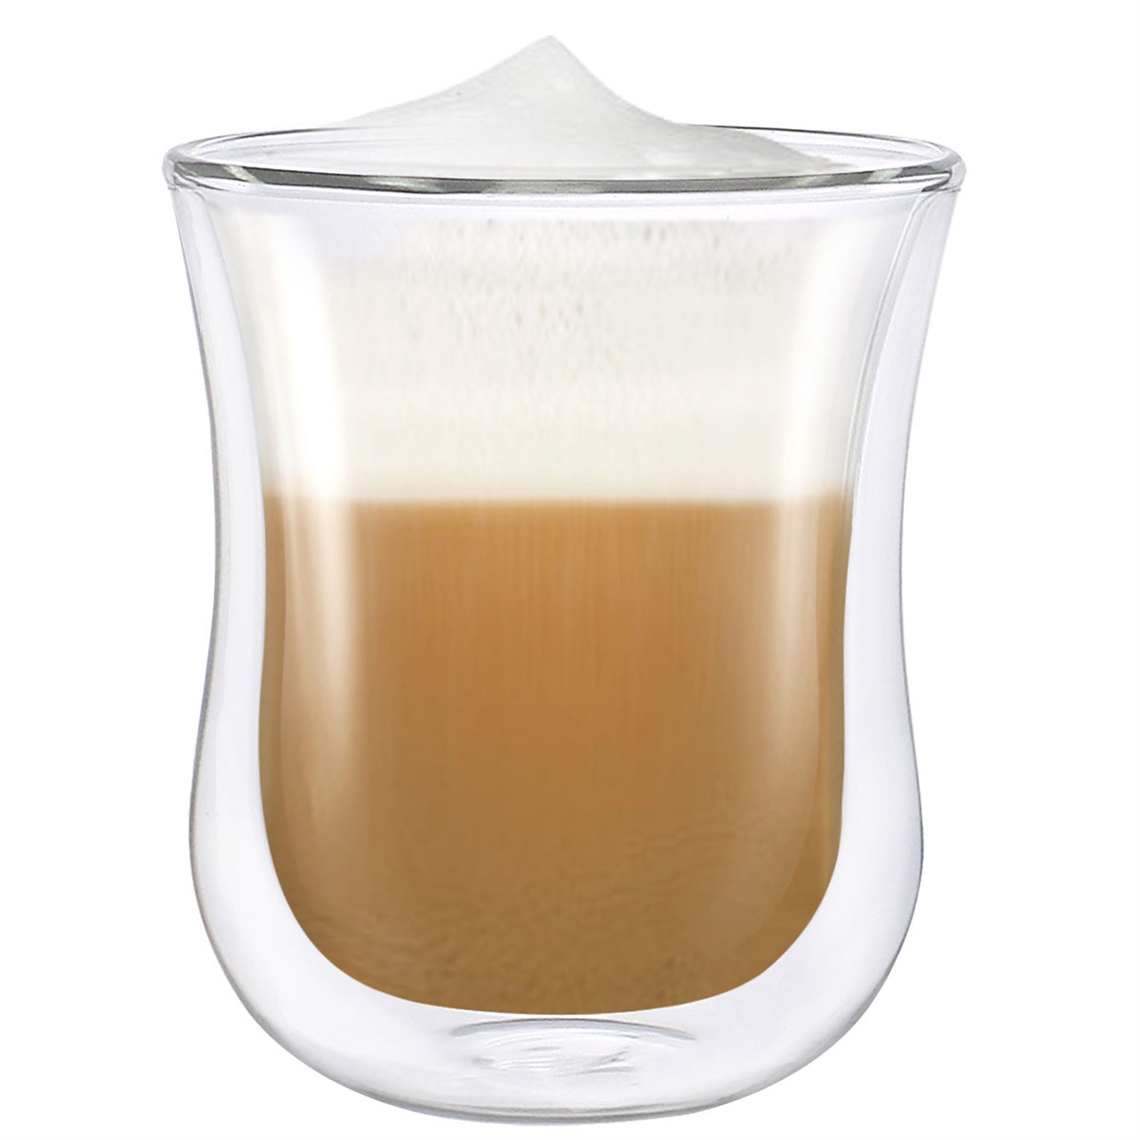 View more restaurant glasses - schott zwiesel from our Tea & Coffee Cups range